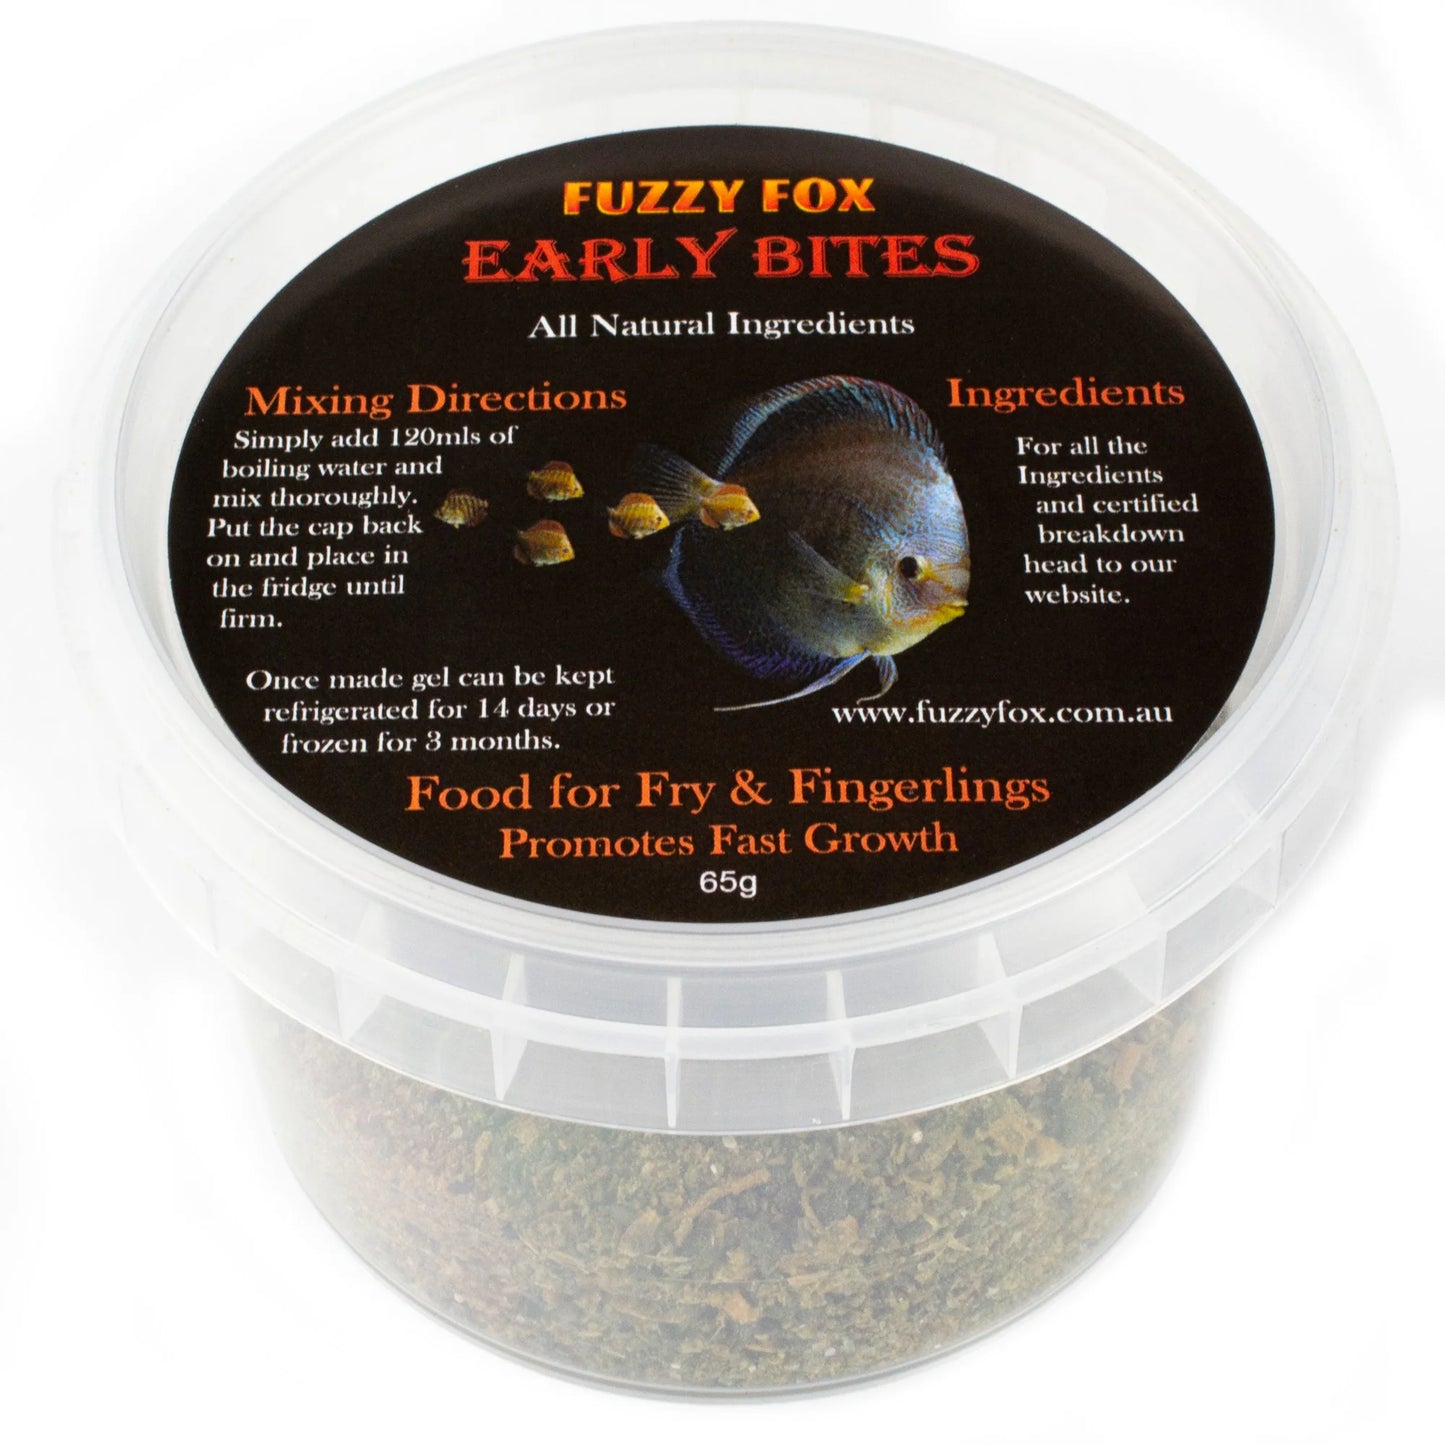 Fuzzy Fox Early Bites Fish Food For Fingerlings and Fry Gel Pre-mix